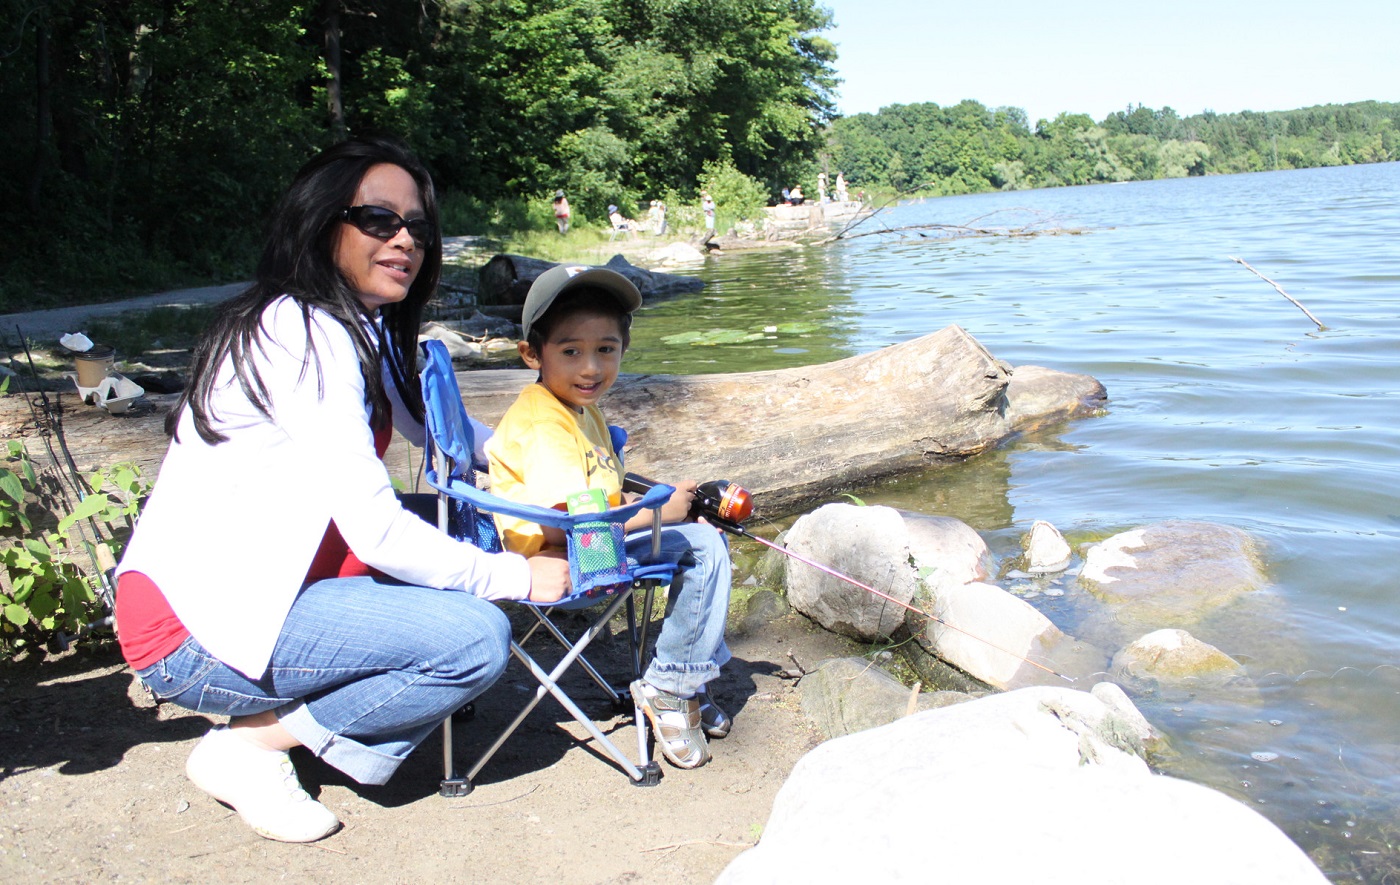 Family fishing day at Heart Lake Conservation Area